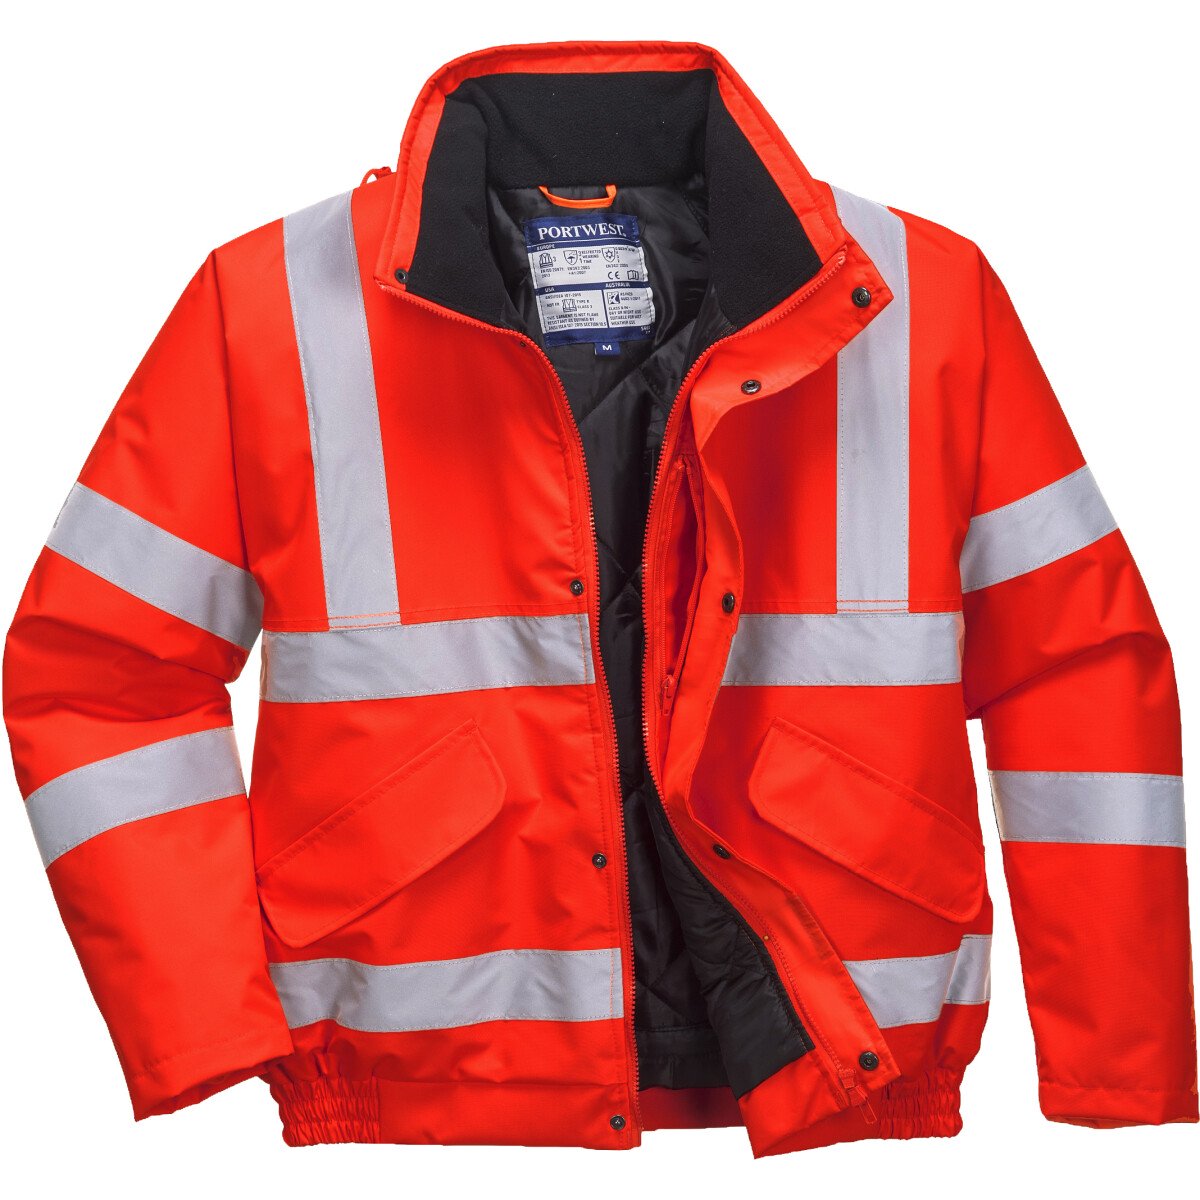 Portwest S463 Hi-Vis Bomber Jacket - Red from Lawson HIS